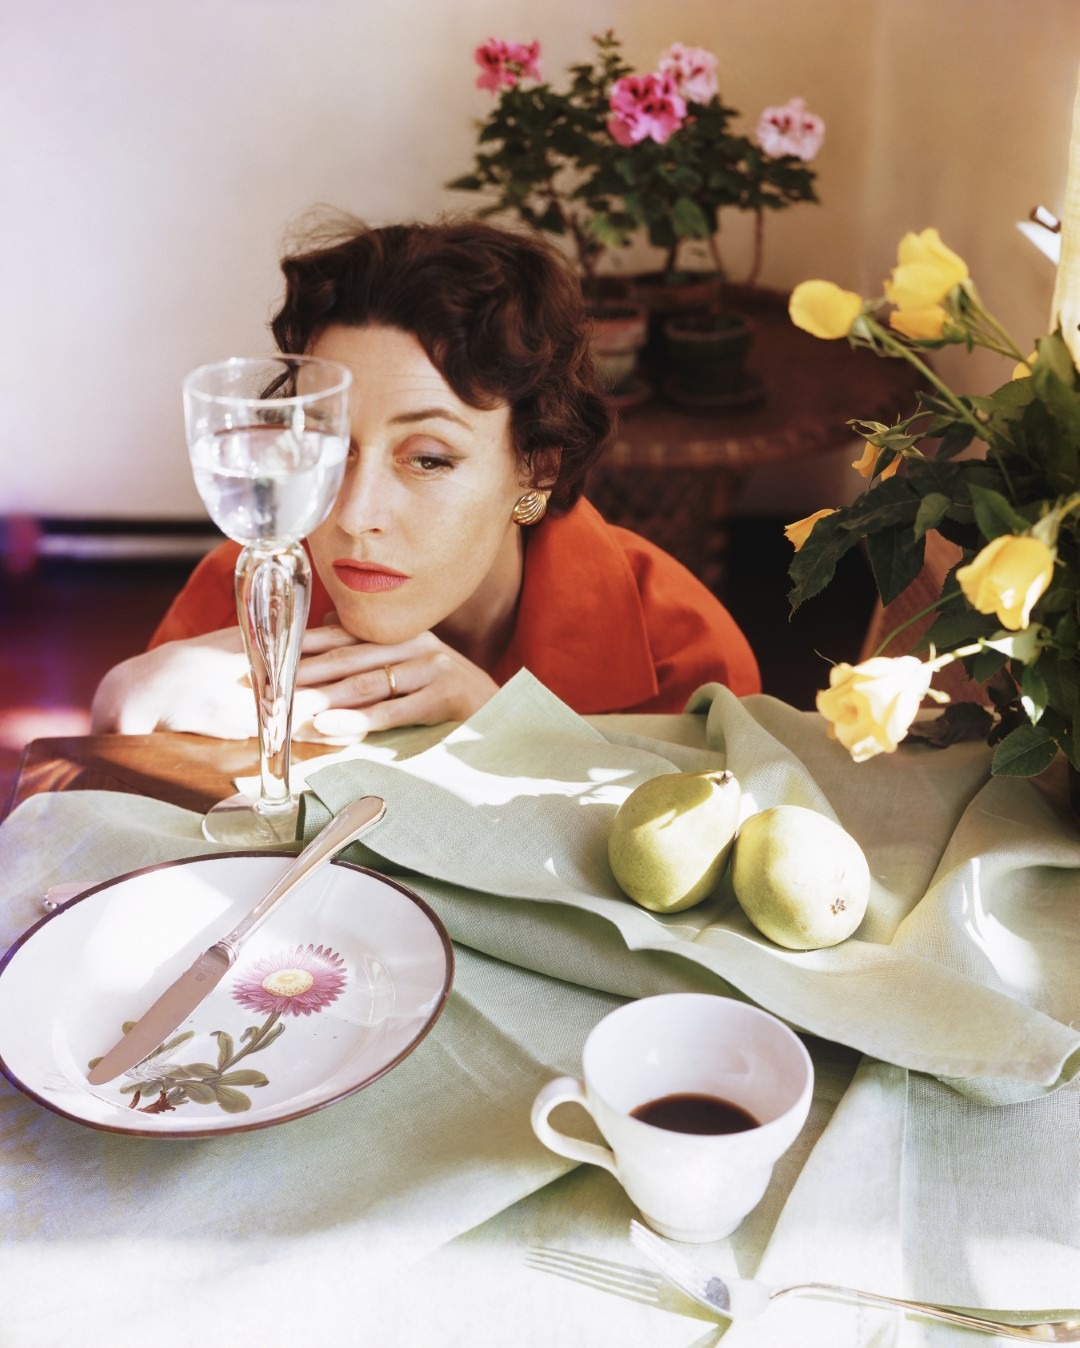 Woman resting her chin on her hands which are resting on a table that is set with an empty plate, a glass of water, a cup of coffee and two pears on a napkin, c.1955